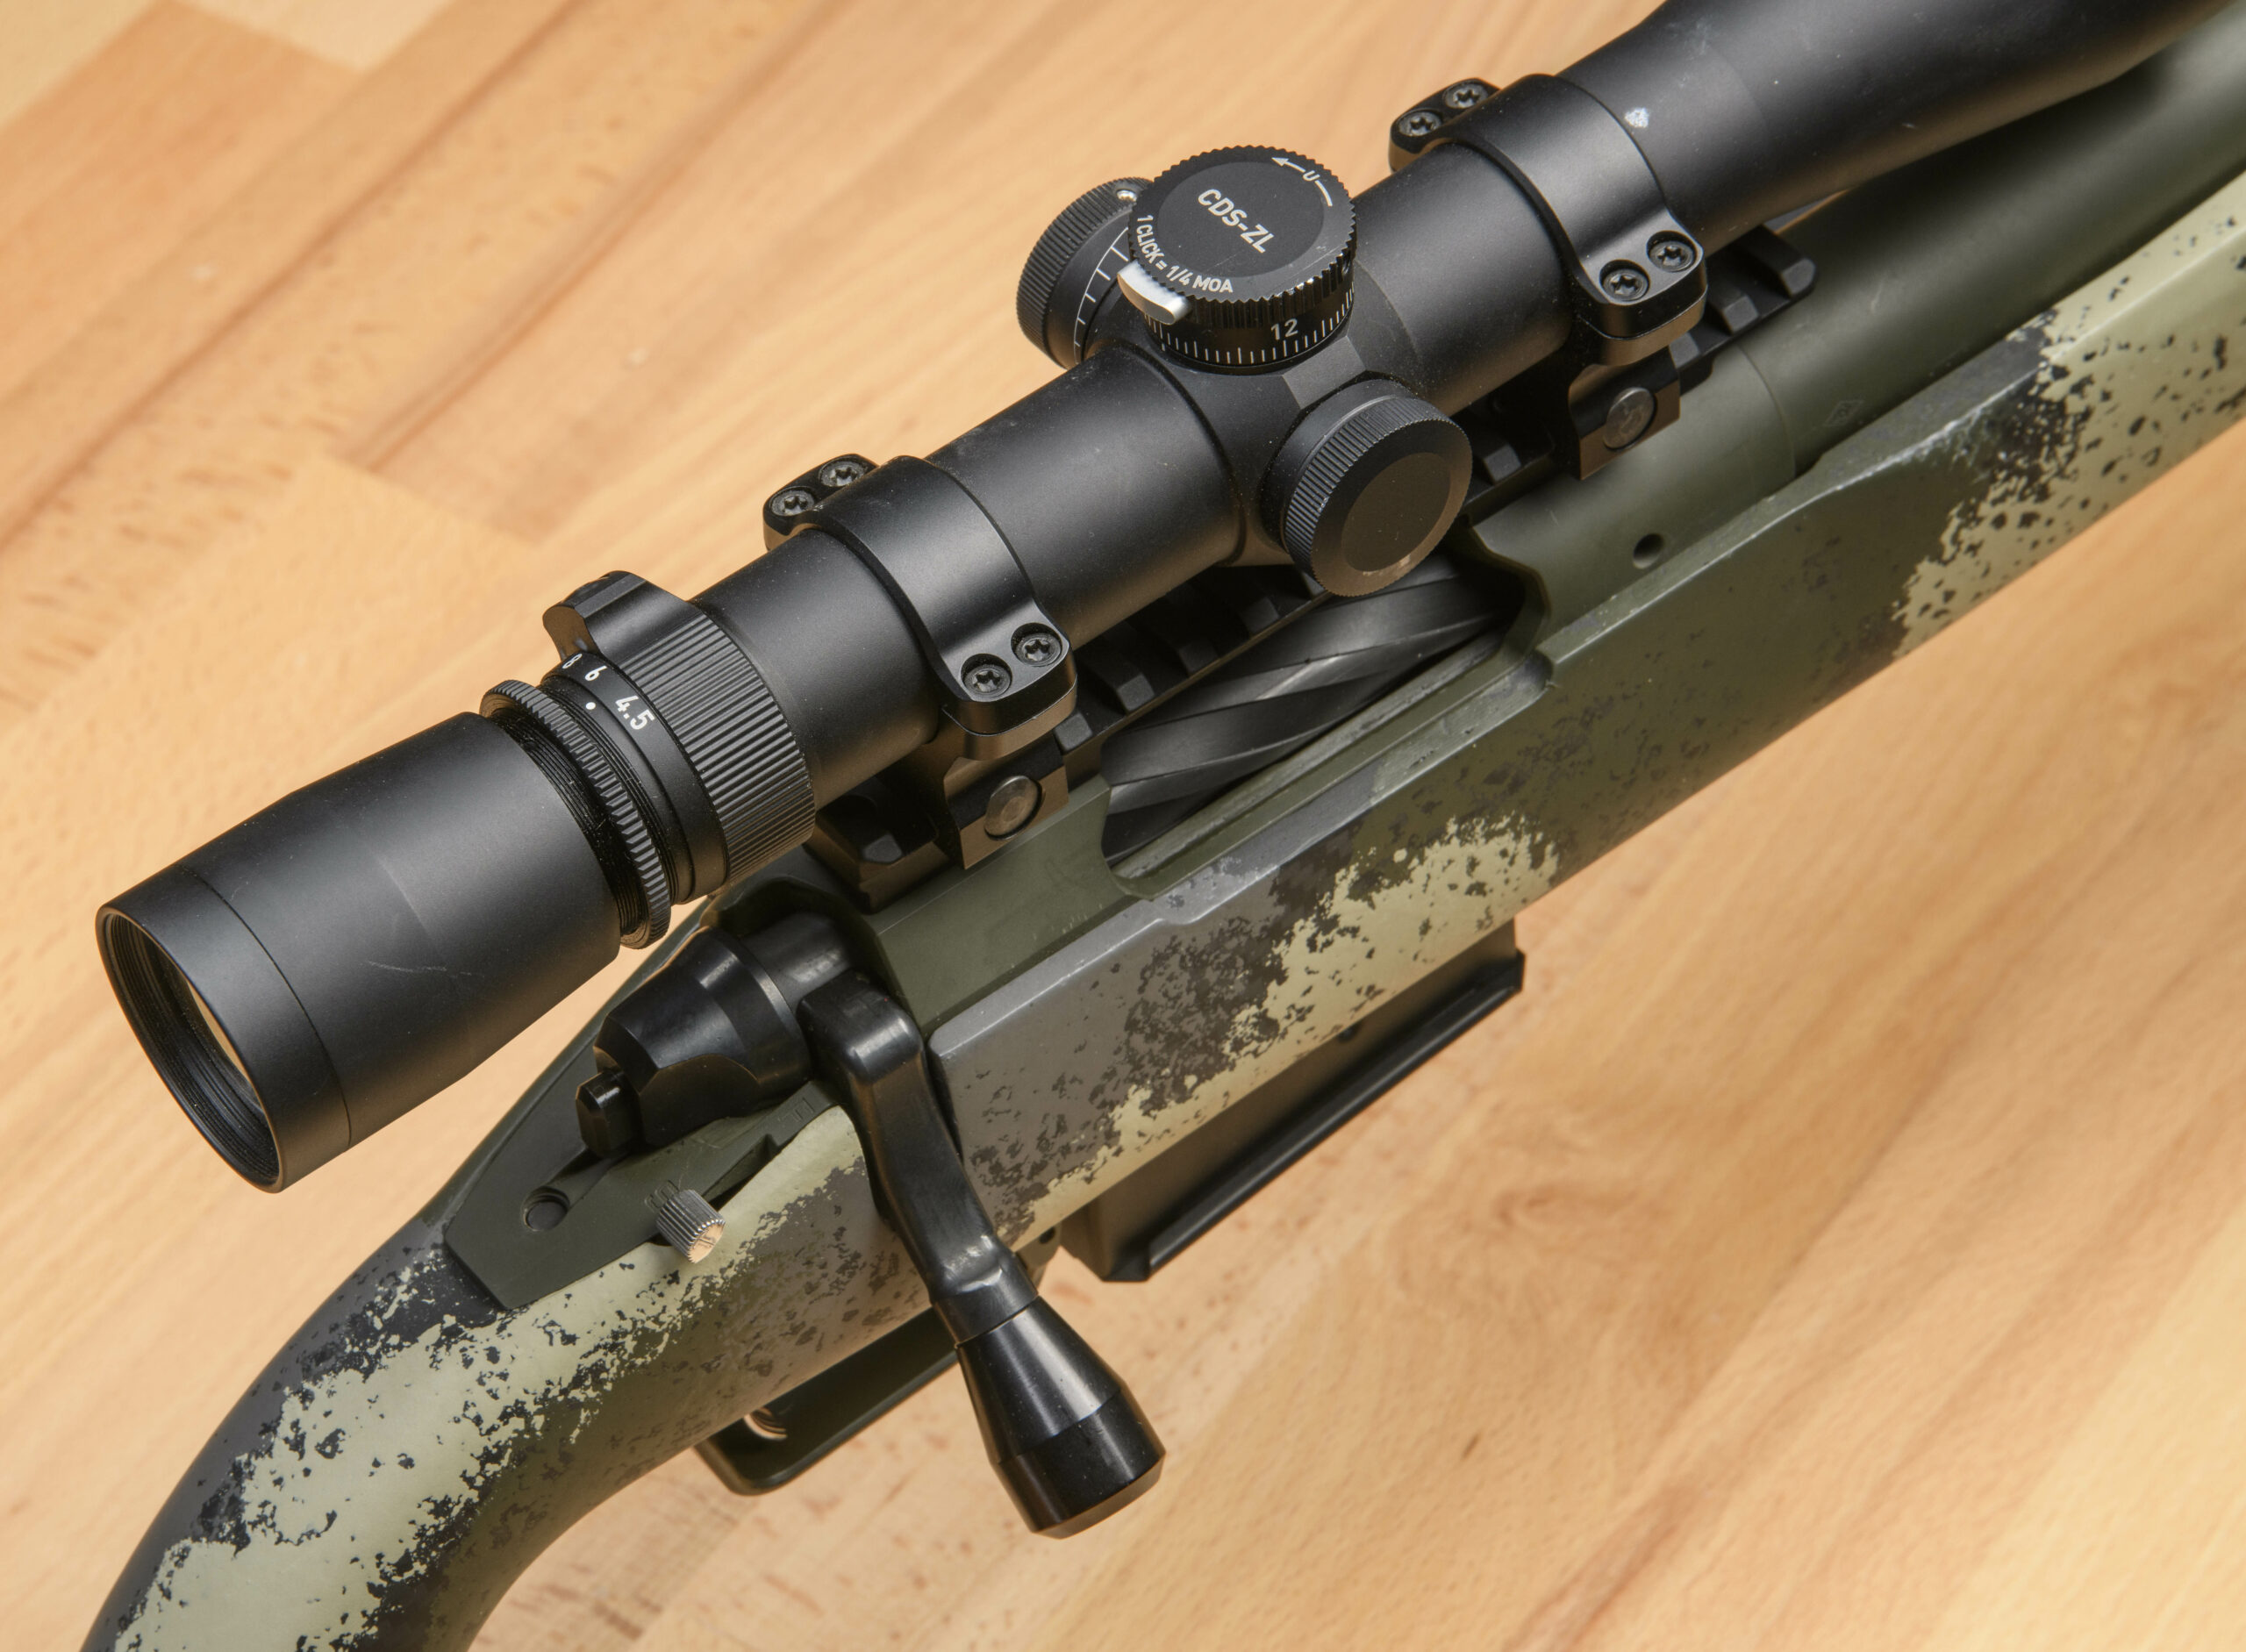 A black riflescope topping a camo-stocked Springfield Waypoint bolt-action rifle.